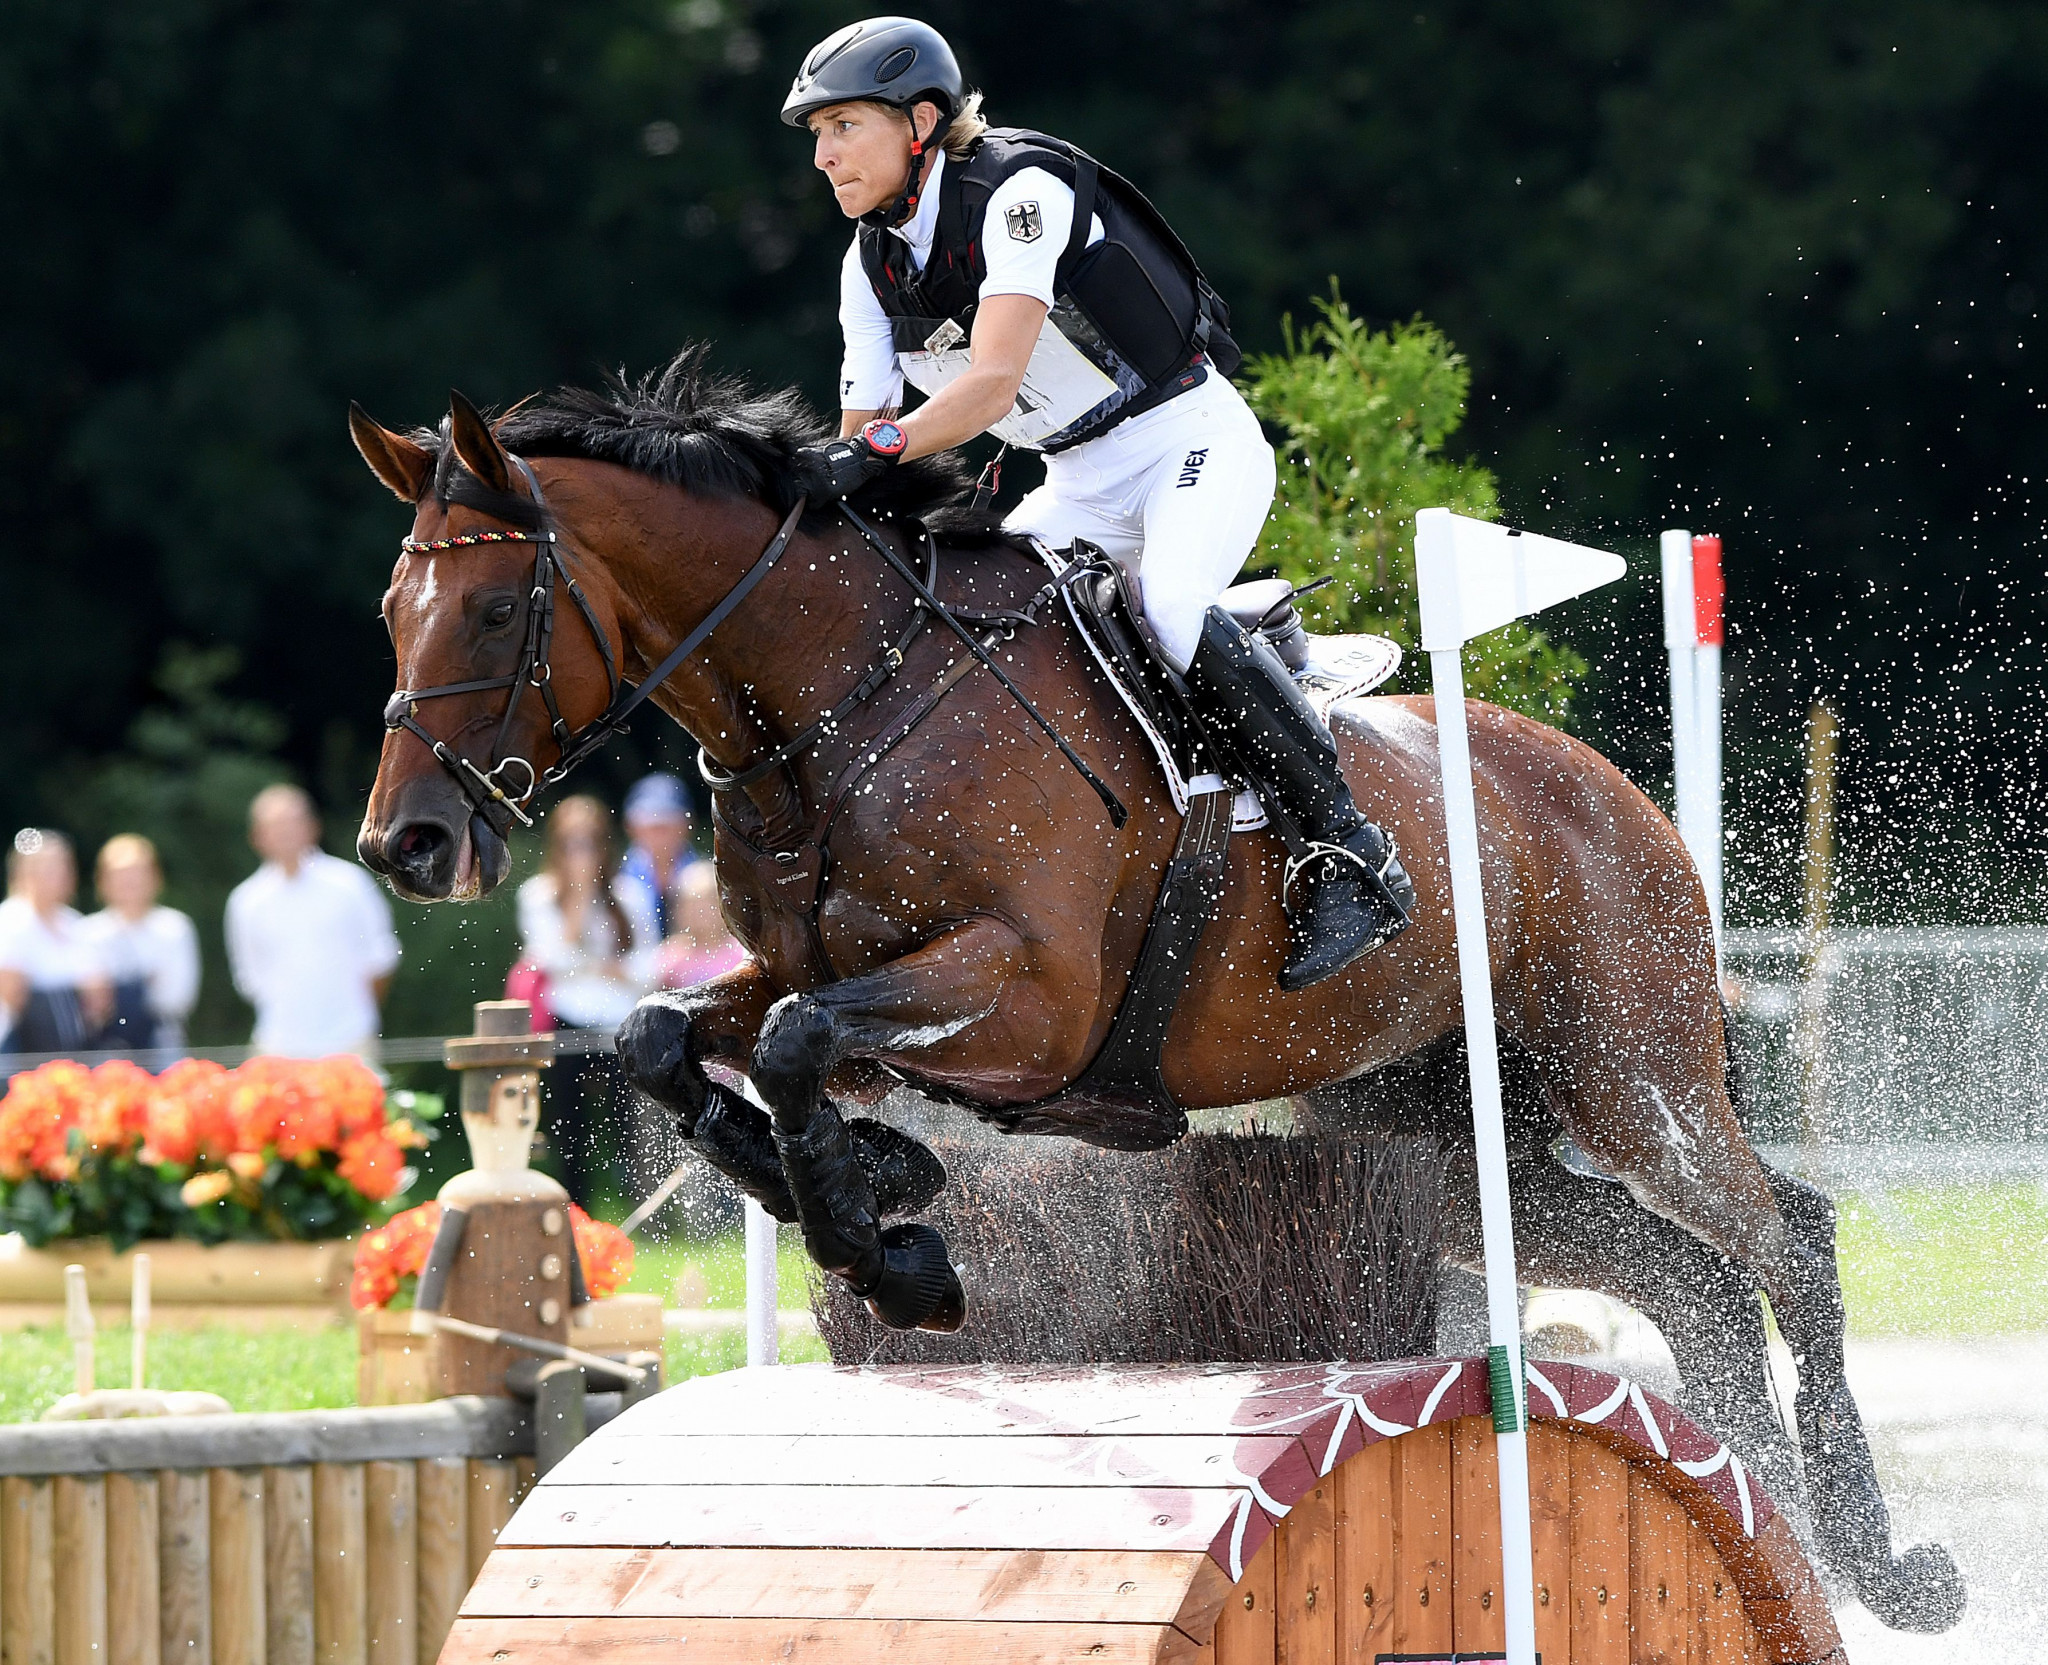 Germany's Ingrid Klimke captured gold medals in the individual and team events at the FEI Evening European Championships in 2019 ©Getty Images